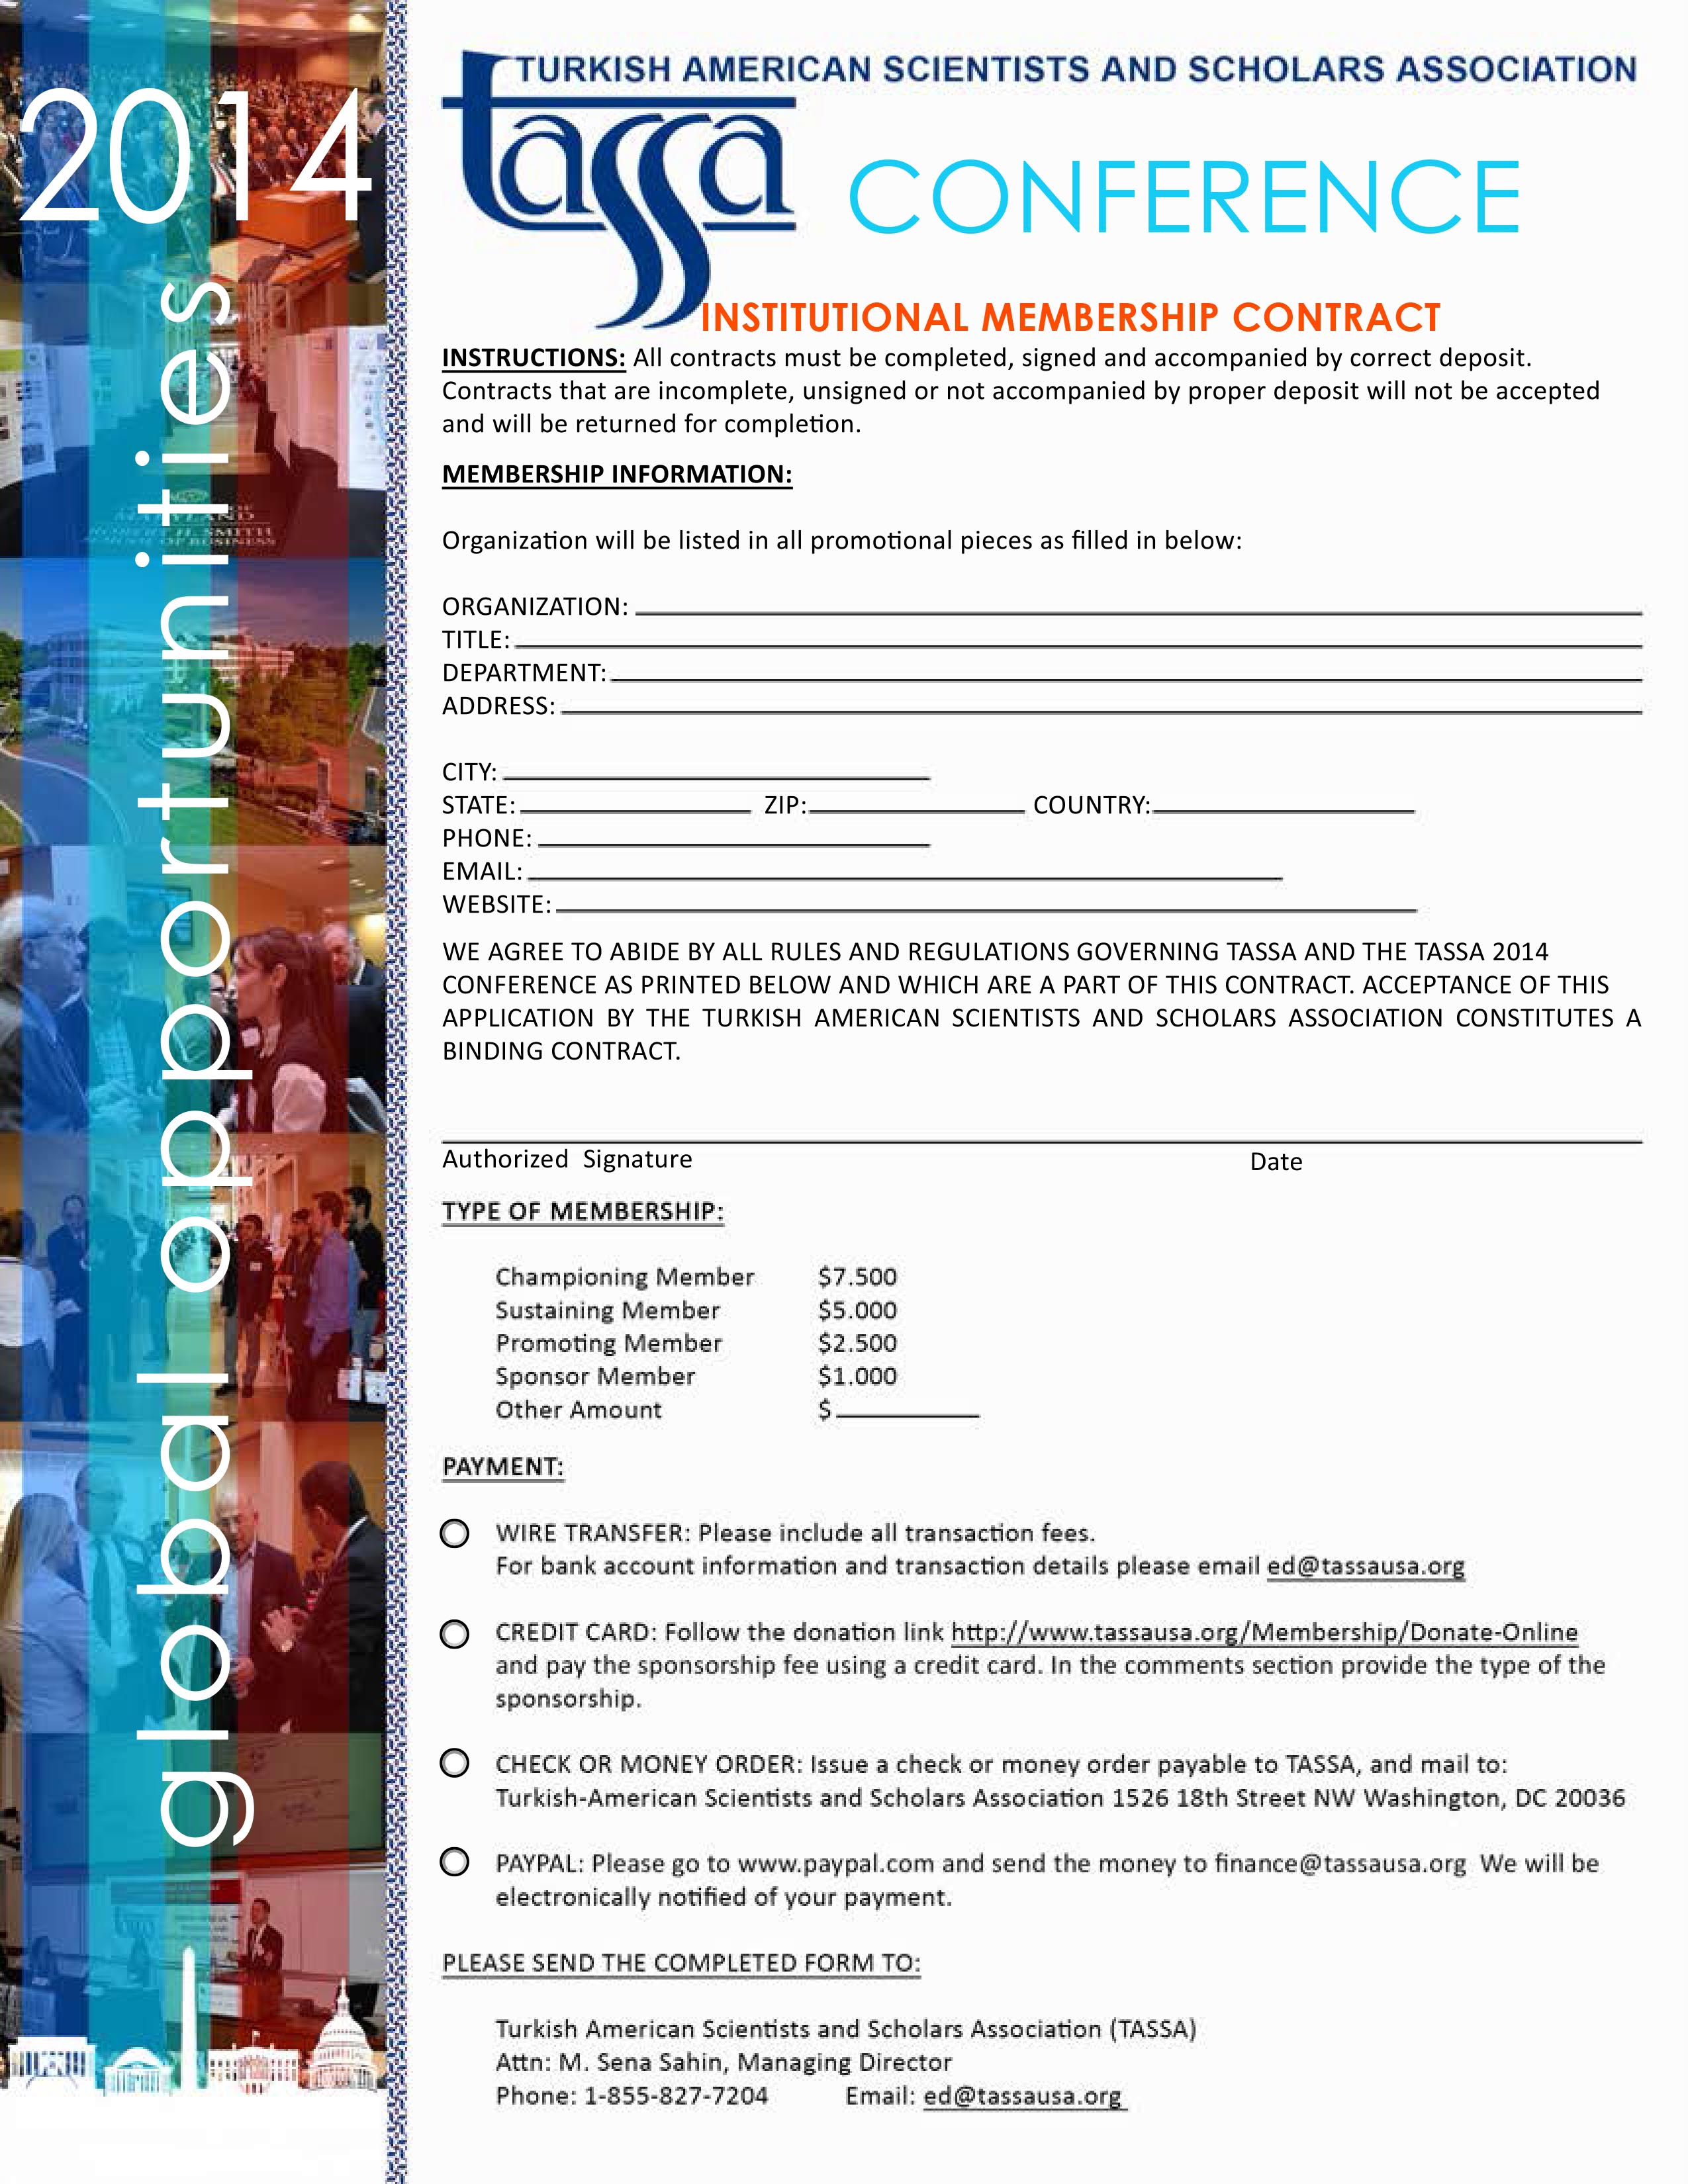 Please Click to Download Institutional Membership Contract